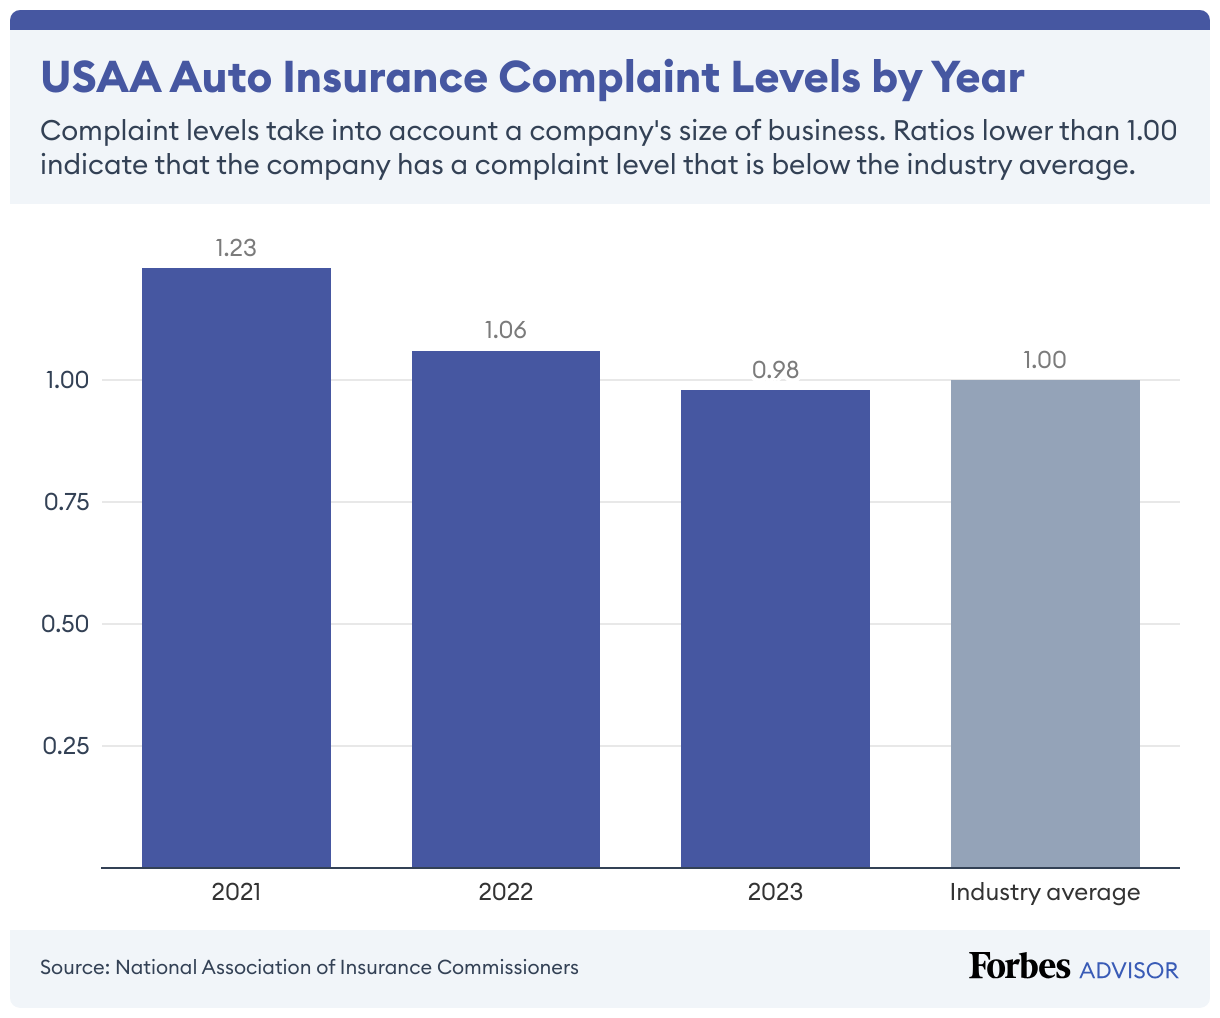 USAA's car insurance complaint level has fallen from above the industry average in 2021 and 2022 to right below in 2023.